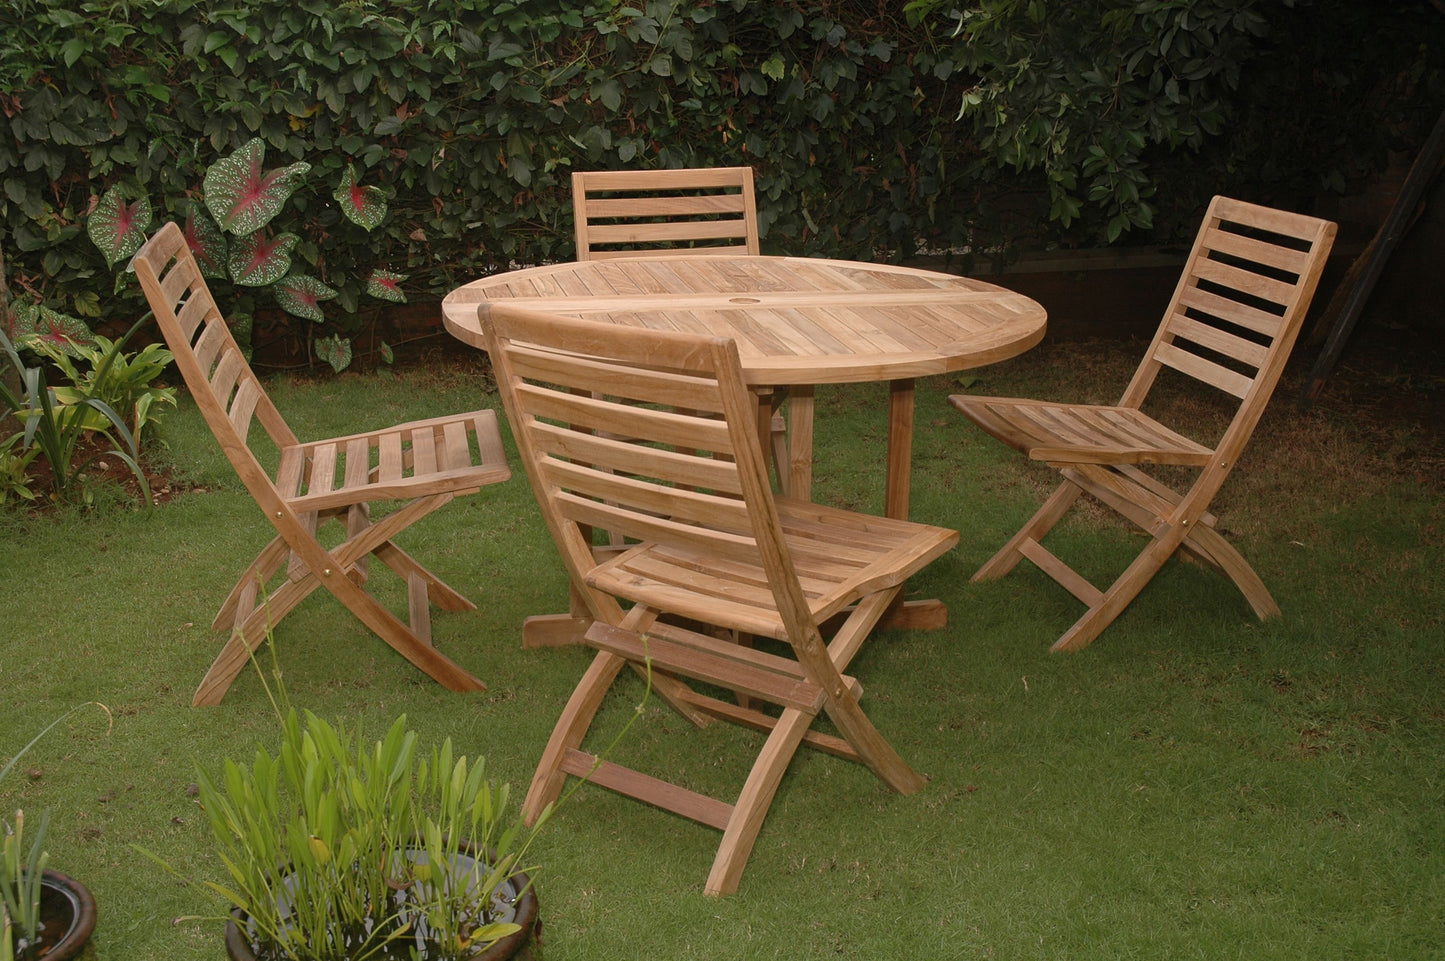 SET-35 Andrew Butterfly Folding 5-pieces Dining Set